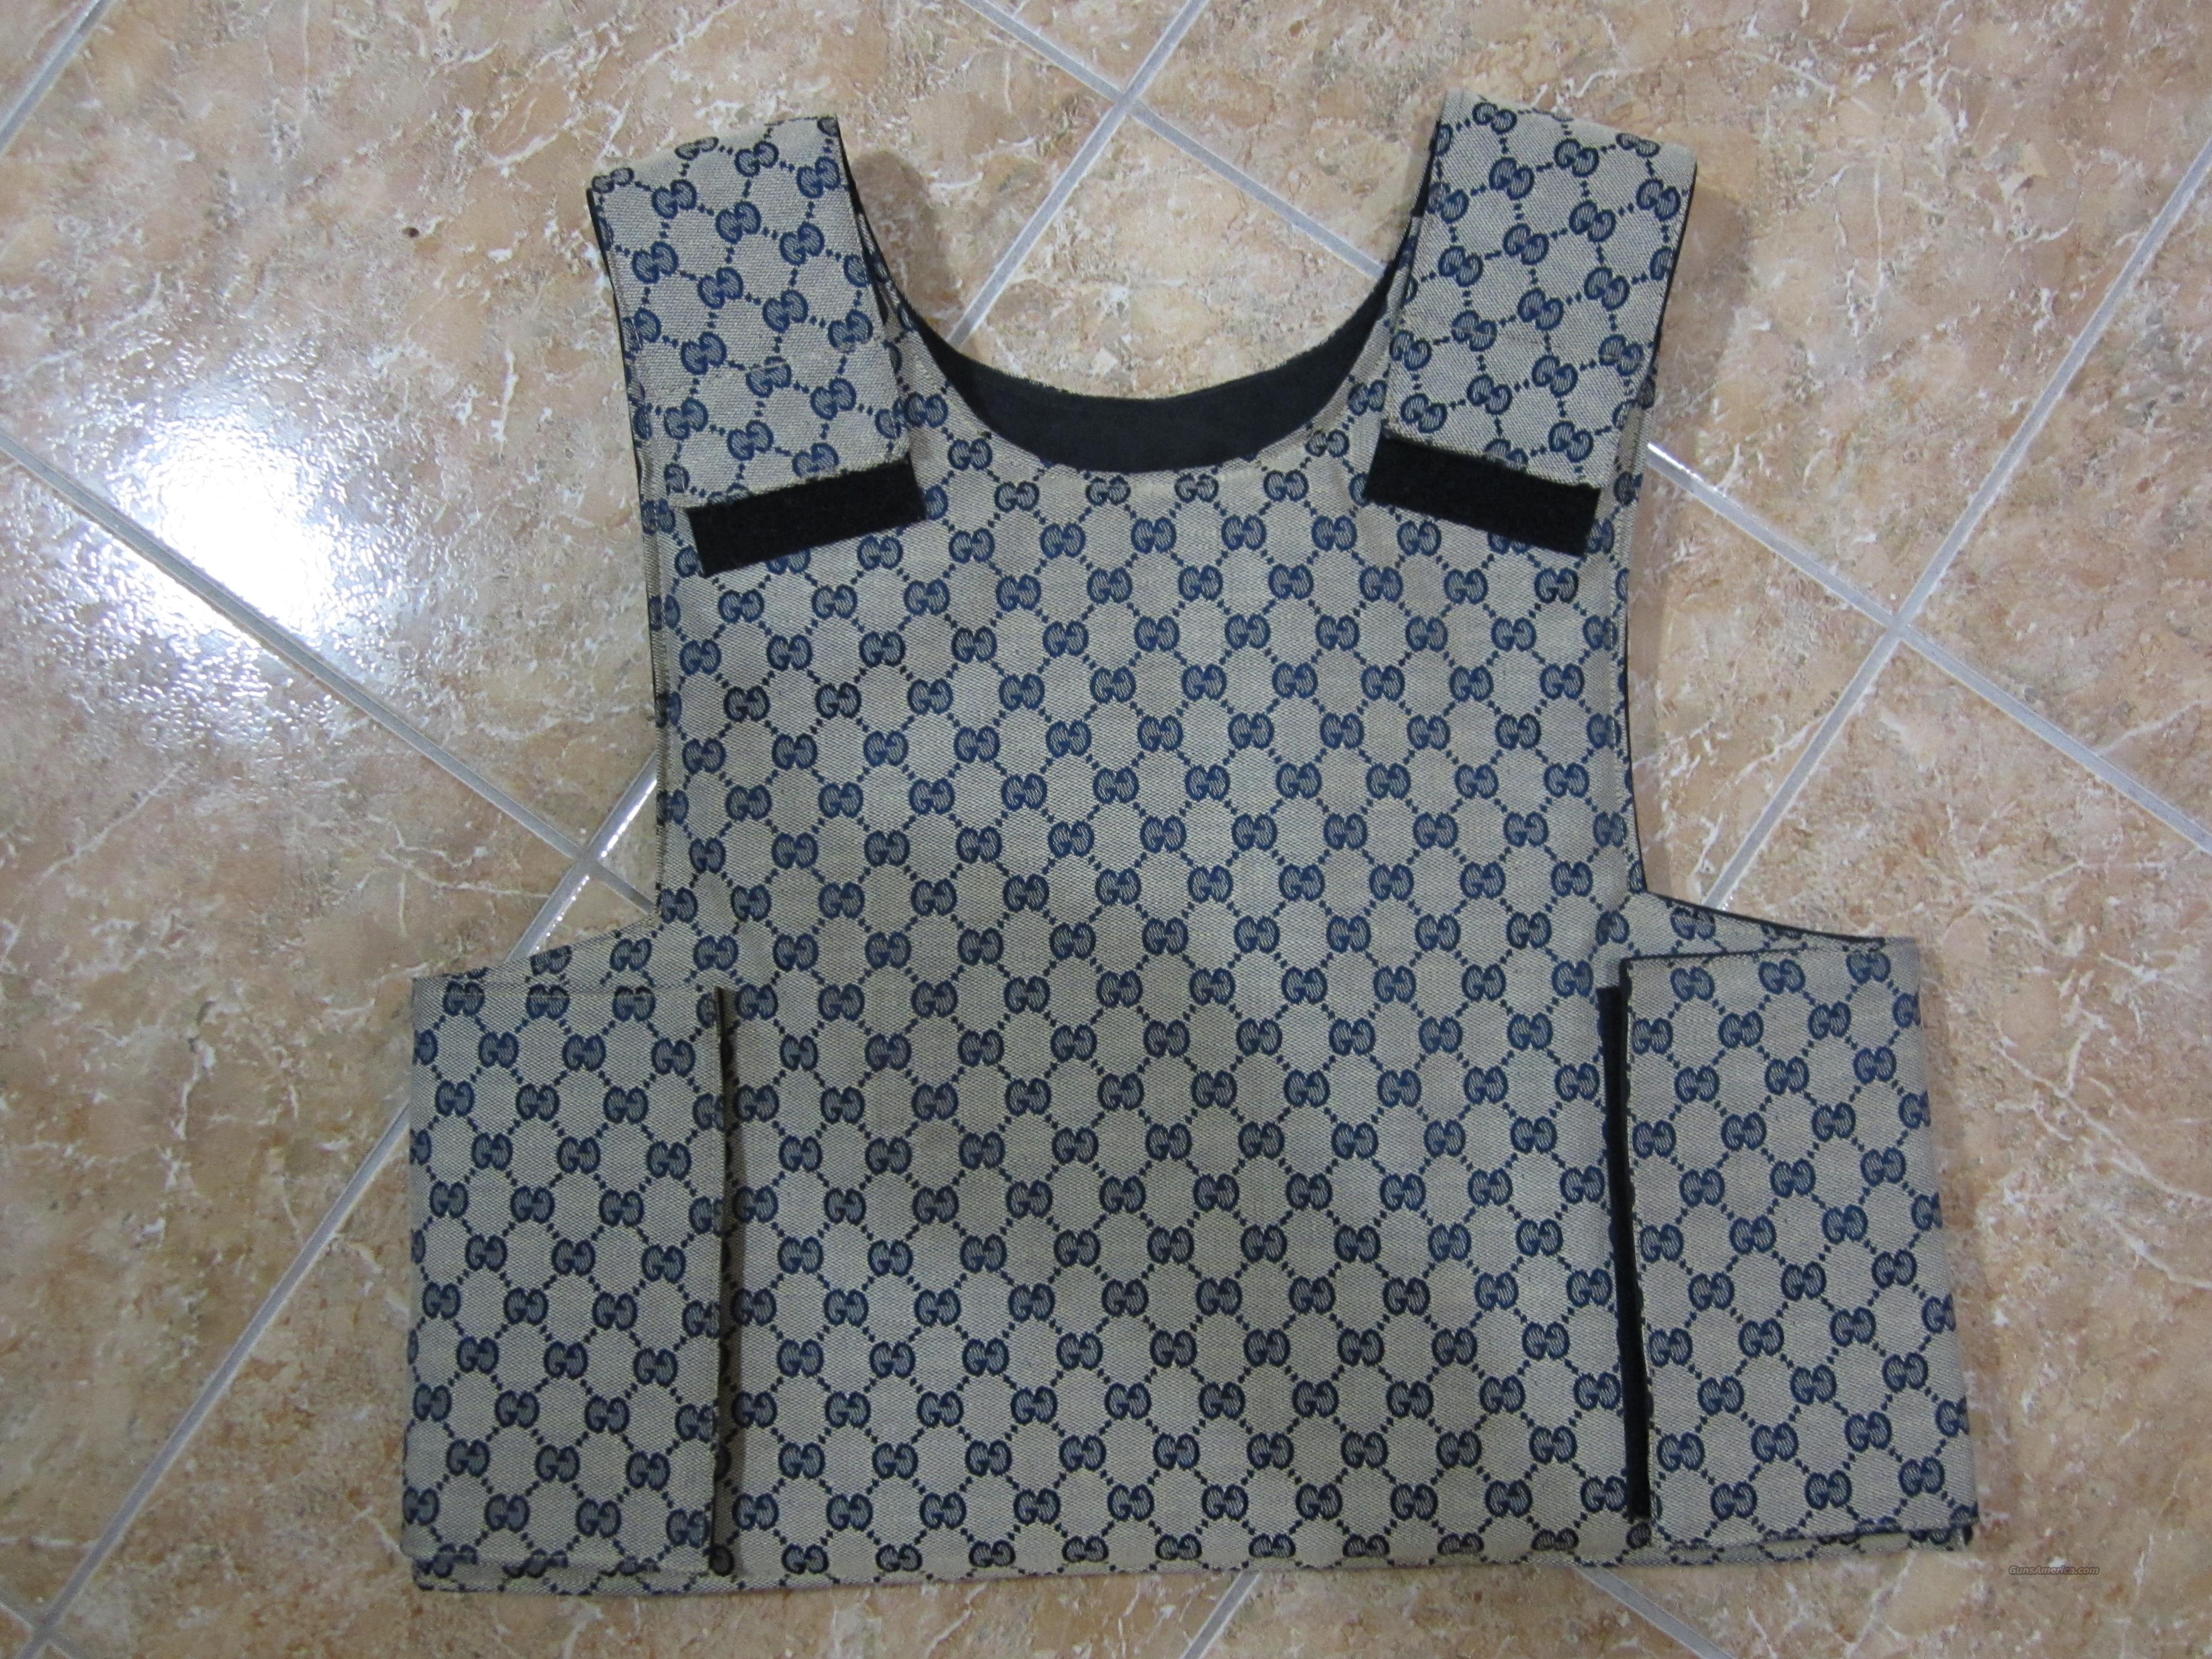 Bullet proof vest level 3A (GUCCI) for sale at : 972331018